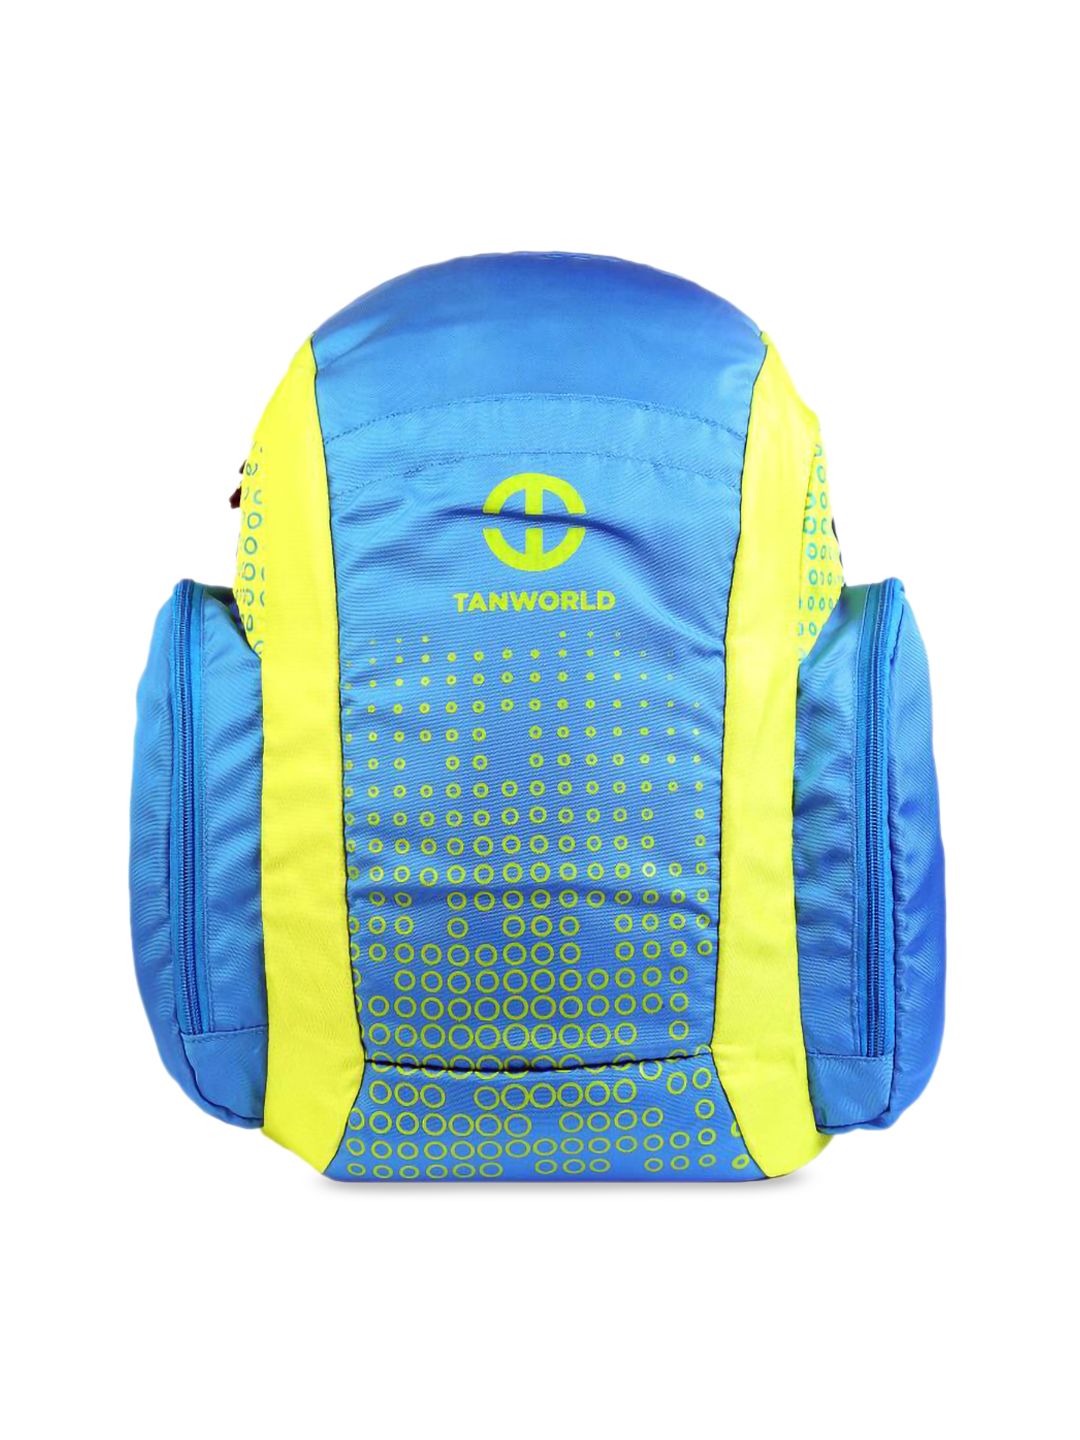 TAN WORLD Unisex Blue & Fluorescent Green Colourblocked Laptop Backpack Price in India